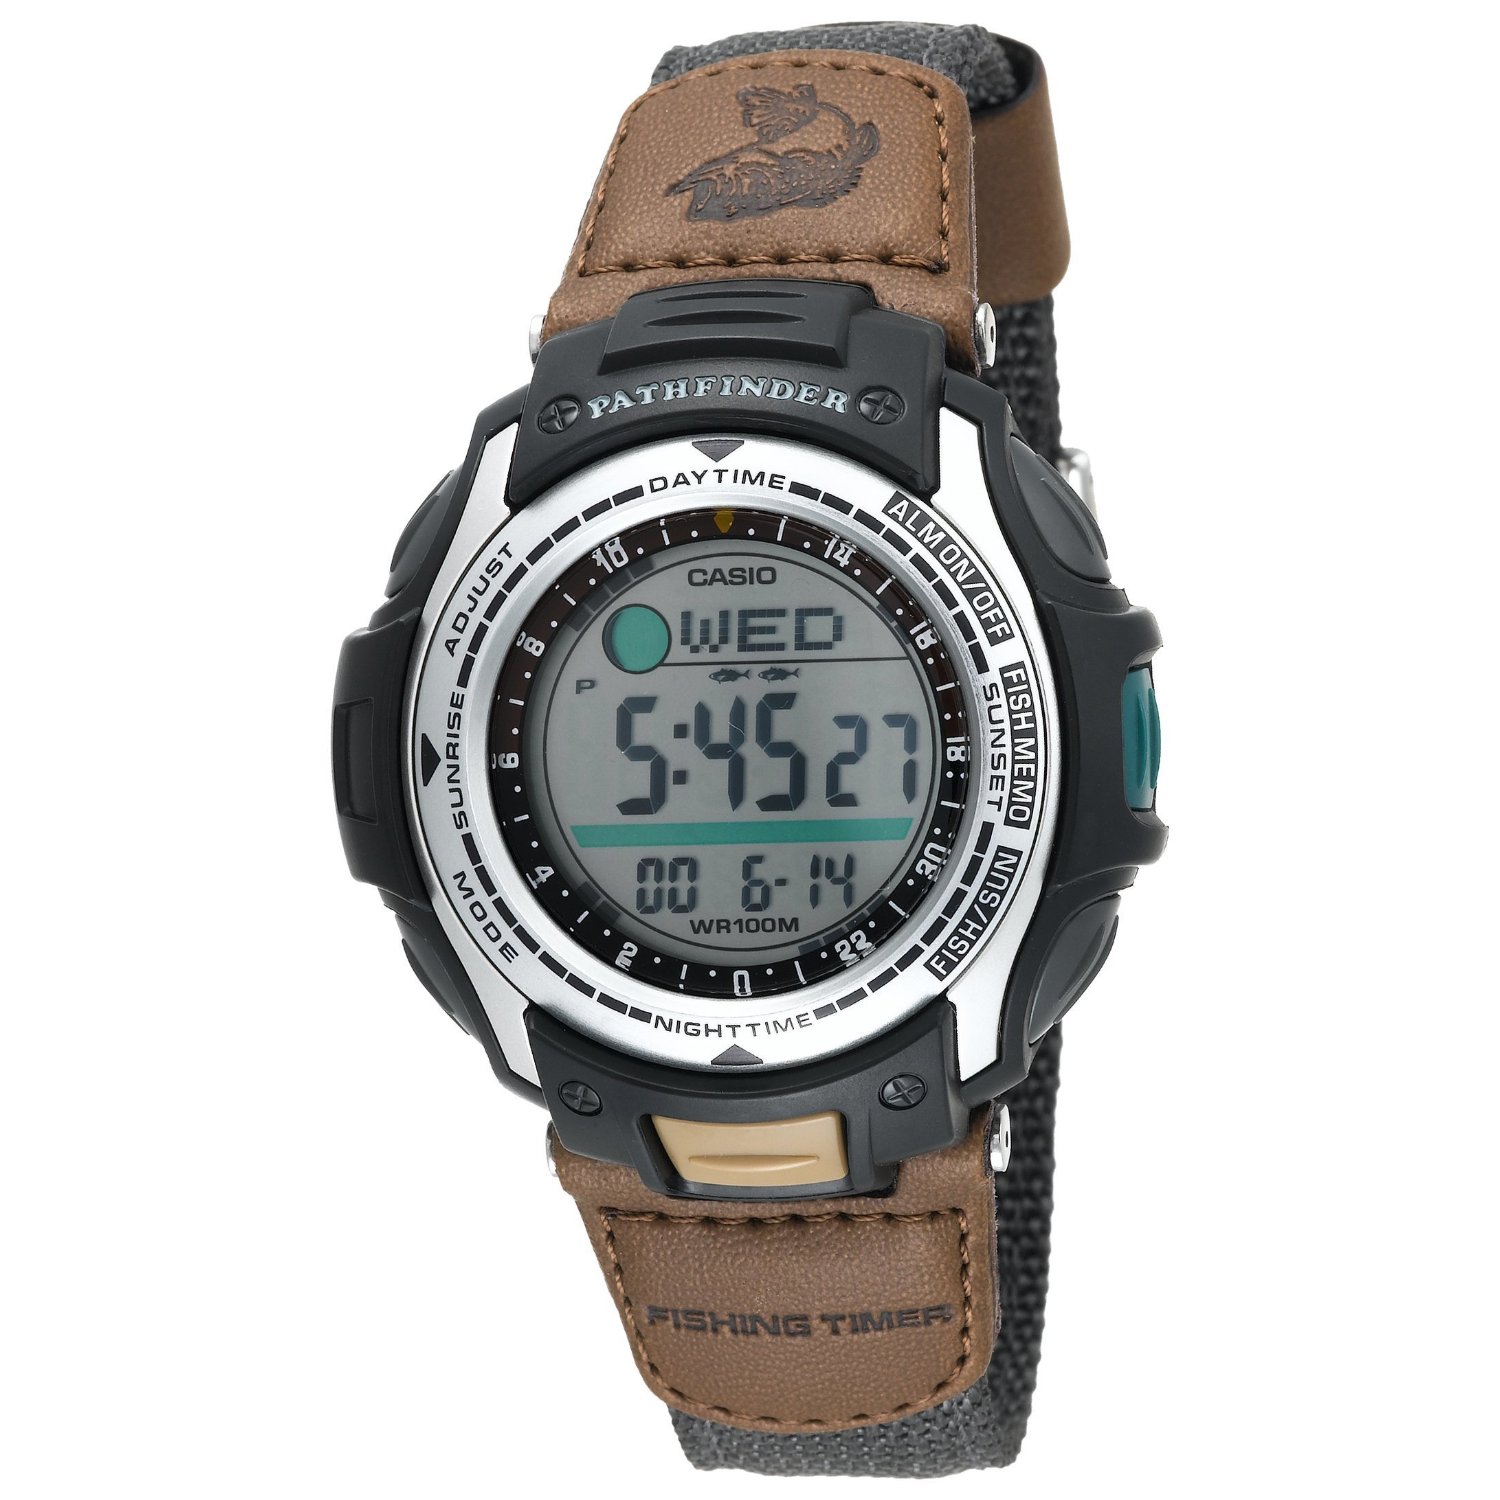 Casio Menâ€™s Pathfinder PAS400B-5V Forester Fishing Moon Phase Watch.